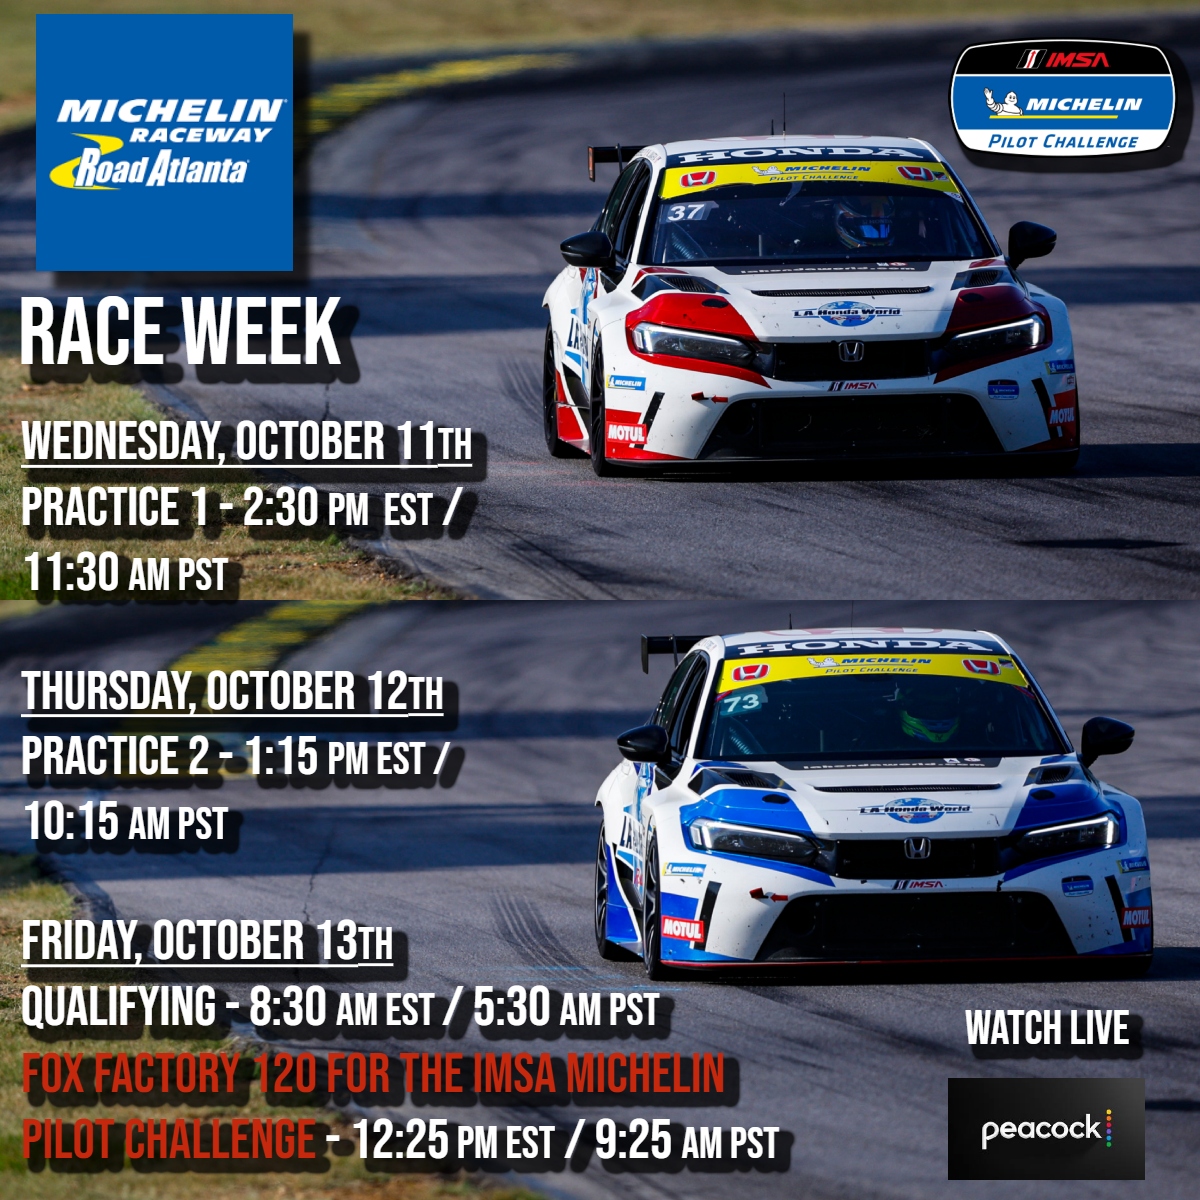 Road Atlanta final race of the IMSA Michelin Pilot Challenge 2023 Season. Home track for Ryan Eversley Dr. William Tally and Mat Pombo. Who are eager to get back behind the wheel along with Mike LaMarra to close this season out with a podium finish. Lets Go Racing !!!